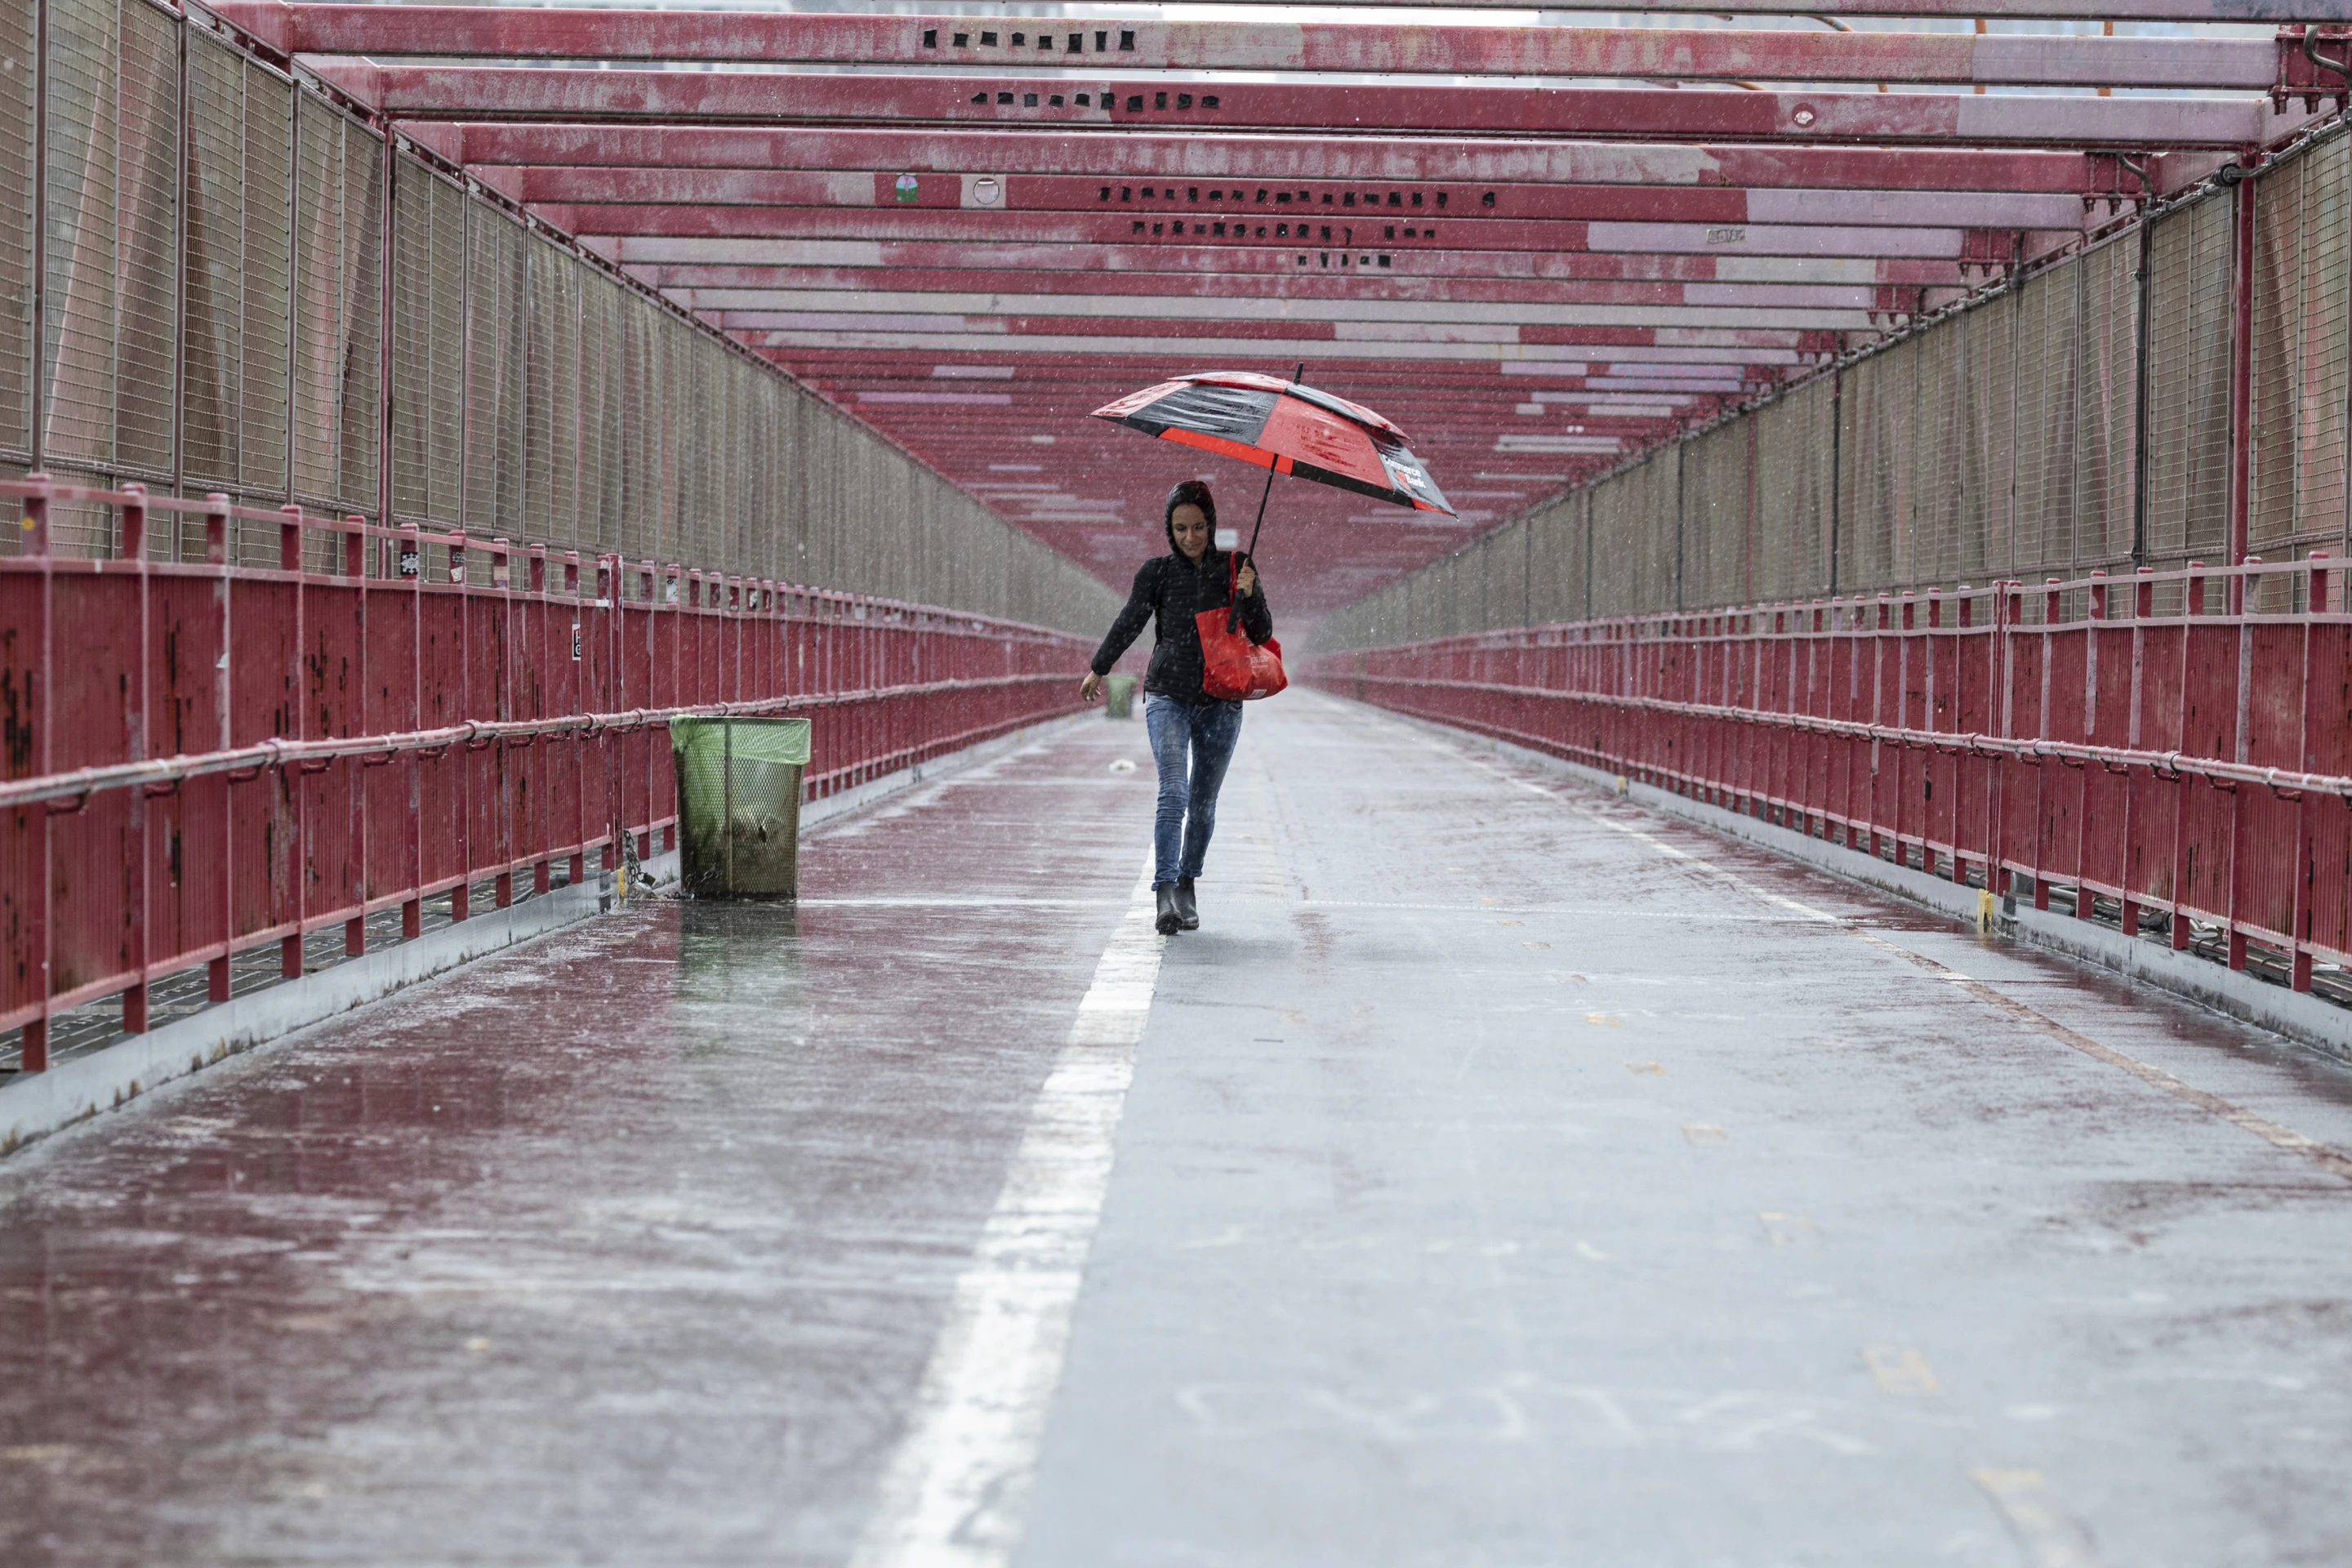 A person walks over the Williamsburg Bridge with an umbrella on Friday, 29 September 2023 in New York. A potent rush-hour rainstorm swamped the New York metropolitan area on Friday, shutting down some subways and commuter railroads, flooding streets and highways, and delaying flights into LaGuardia Airport. Photo: Stefan Jeremiah / AP Photo